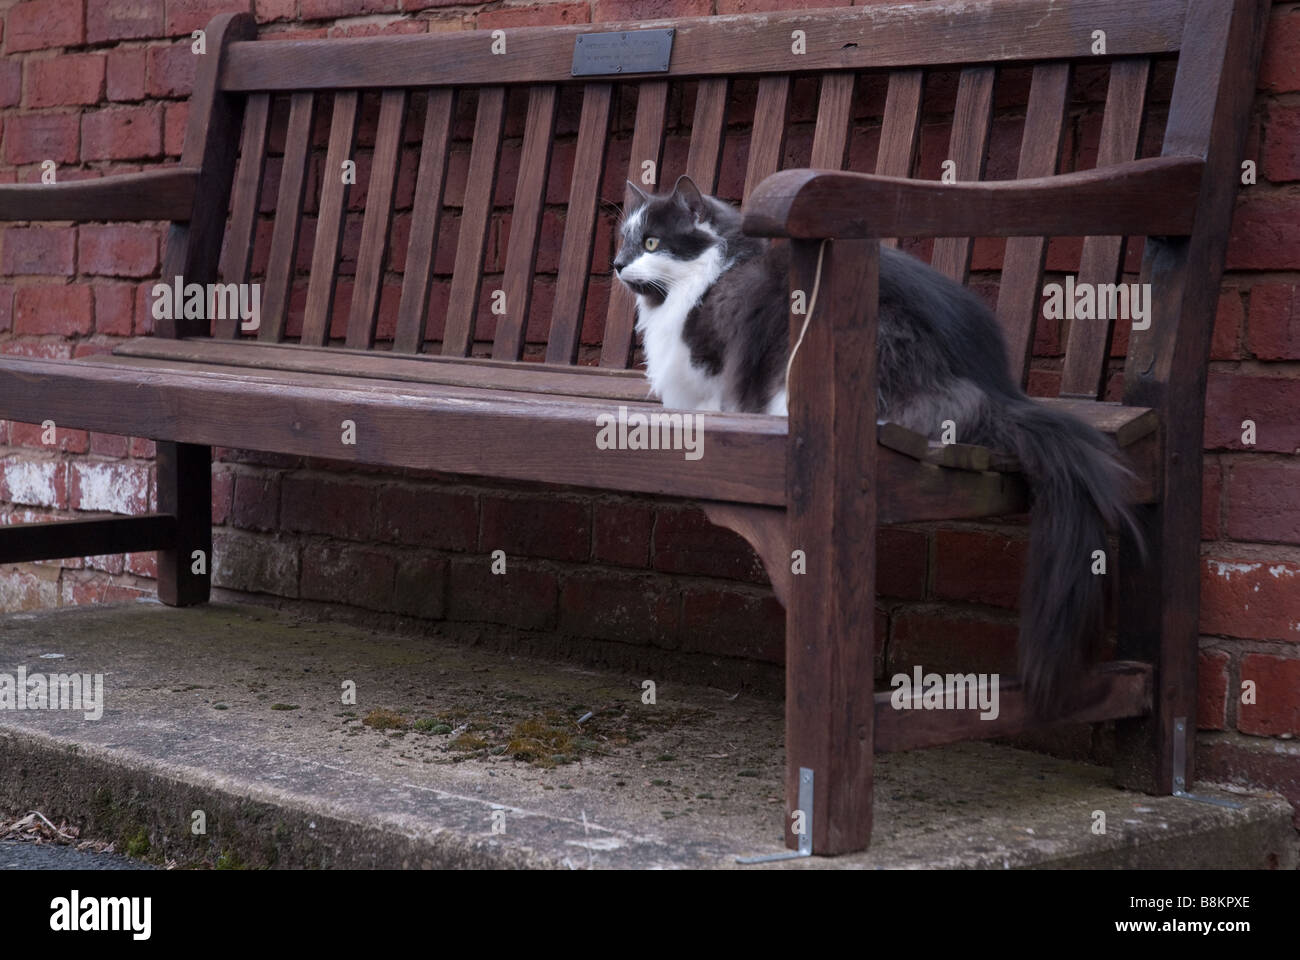 A grey and white long haired domestic cat sitting on a public bench. Stock Photo